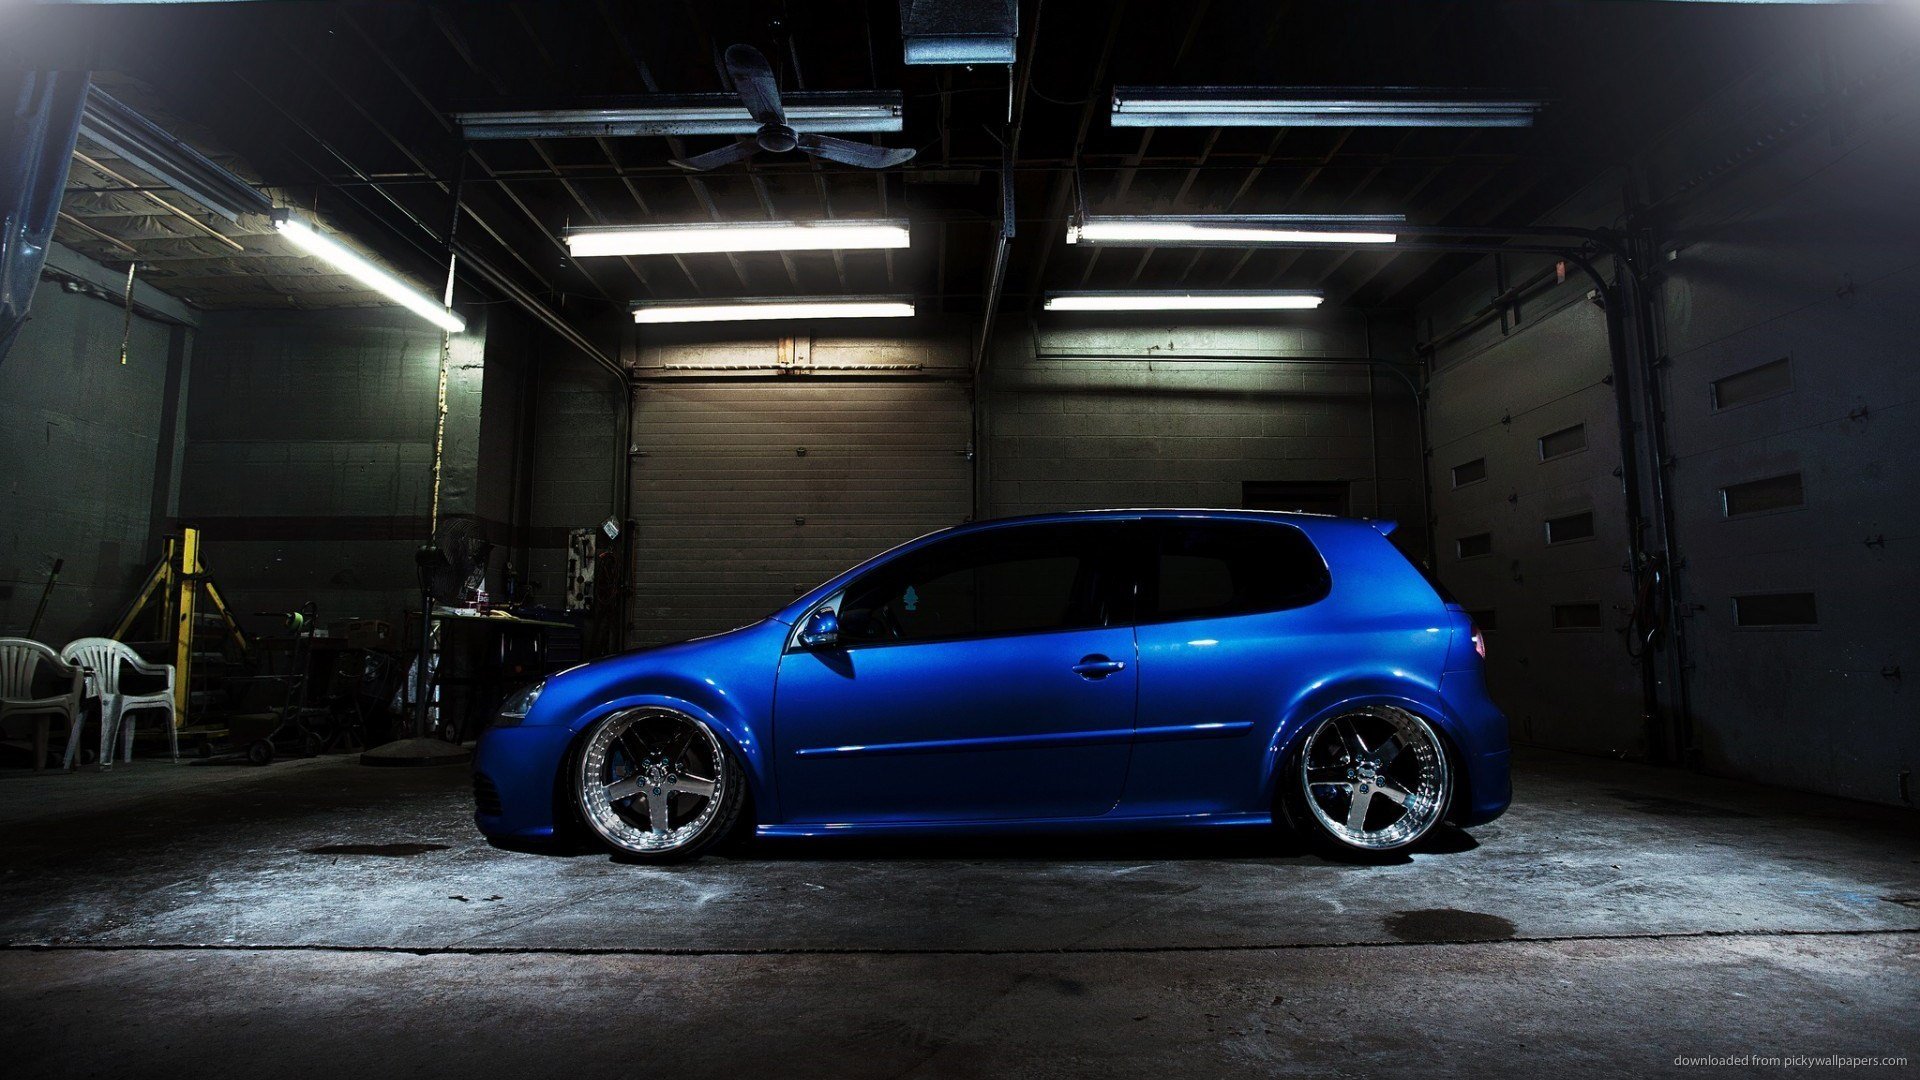  Volkswagen GTI Side View Wallpaper Screensaver For Kindle3 And DX 1920x1080